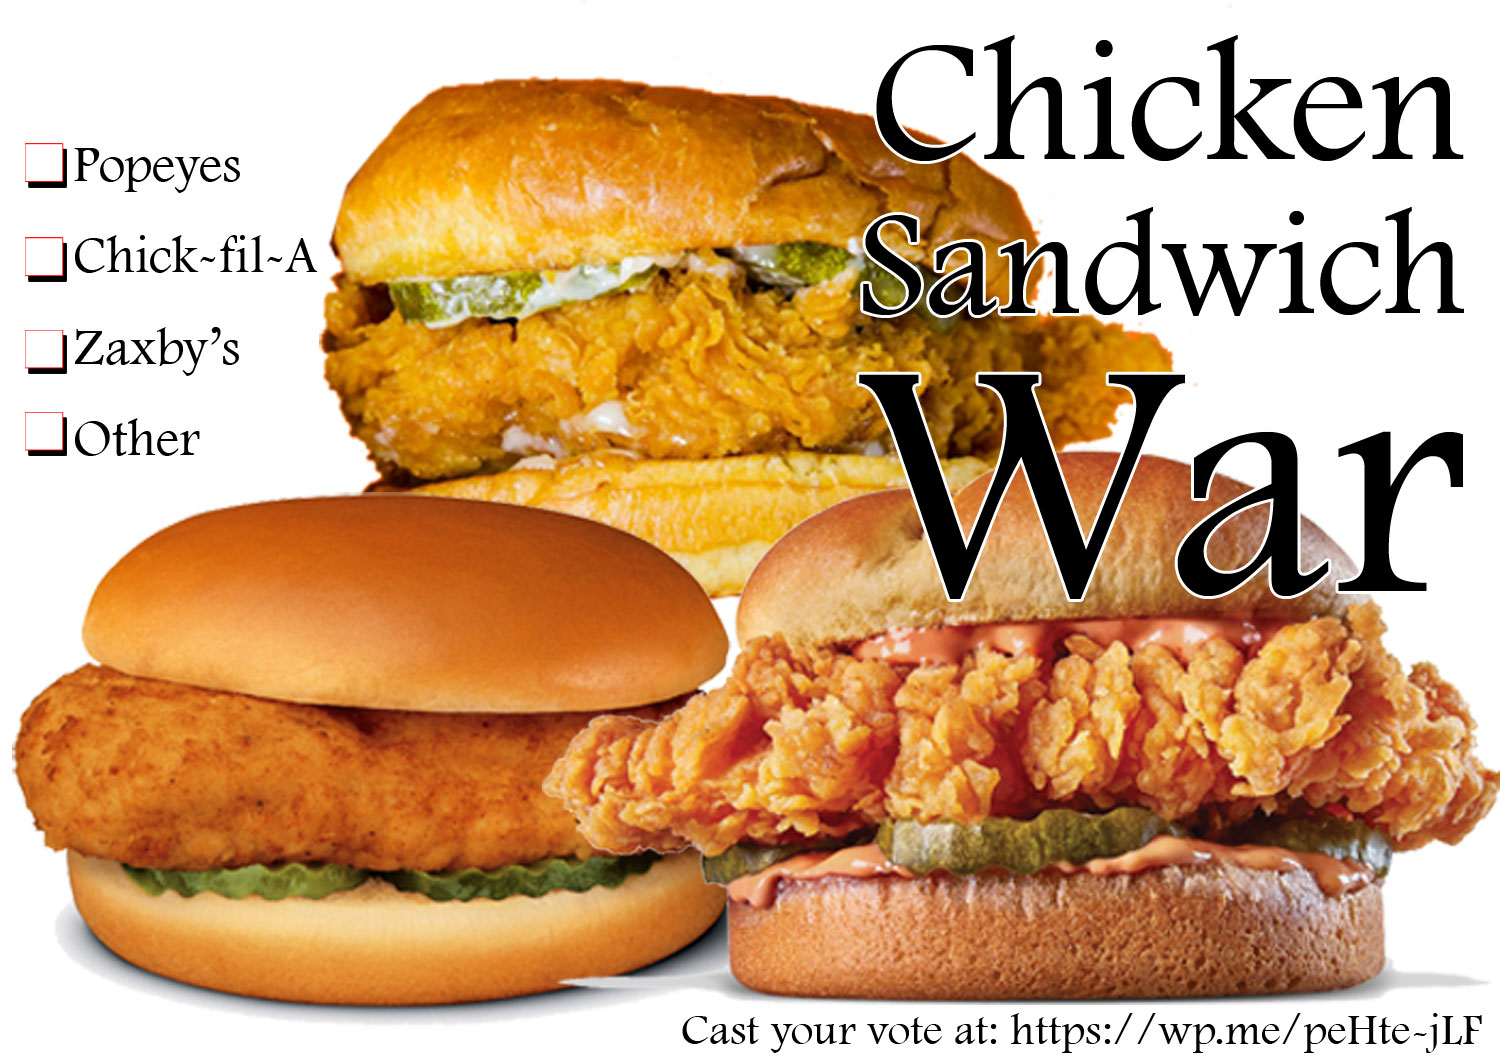 The Chicken Sandwich War - Once there was a war between two places on a chicken sandwich, now that war added another place to make three places. (Includes a poll to cast your vote!) #ChickenSandwich #ChickenSandwichWar #ChickfilA #Popeyes #Zaxbys